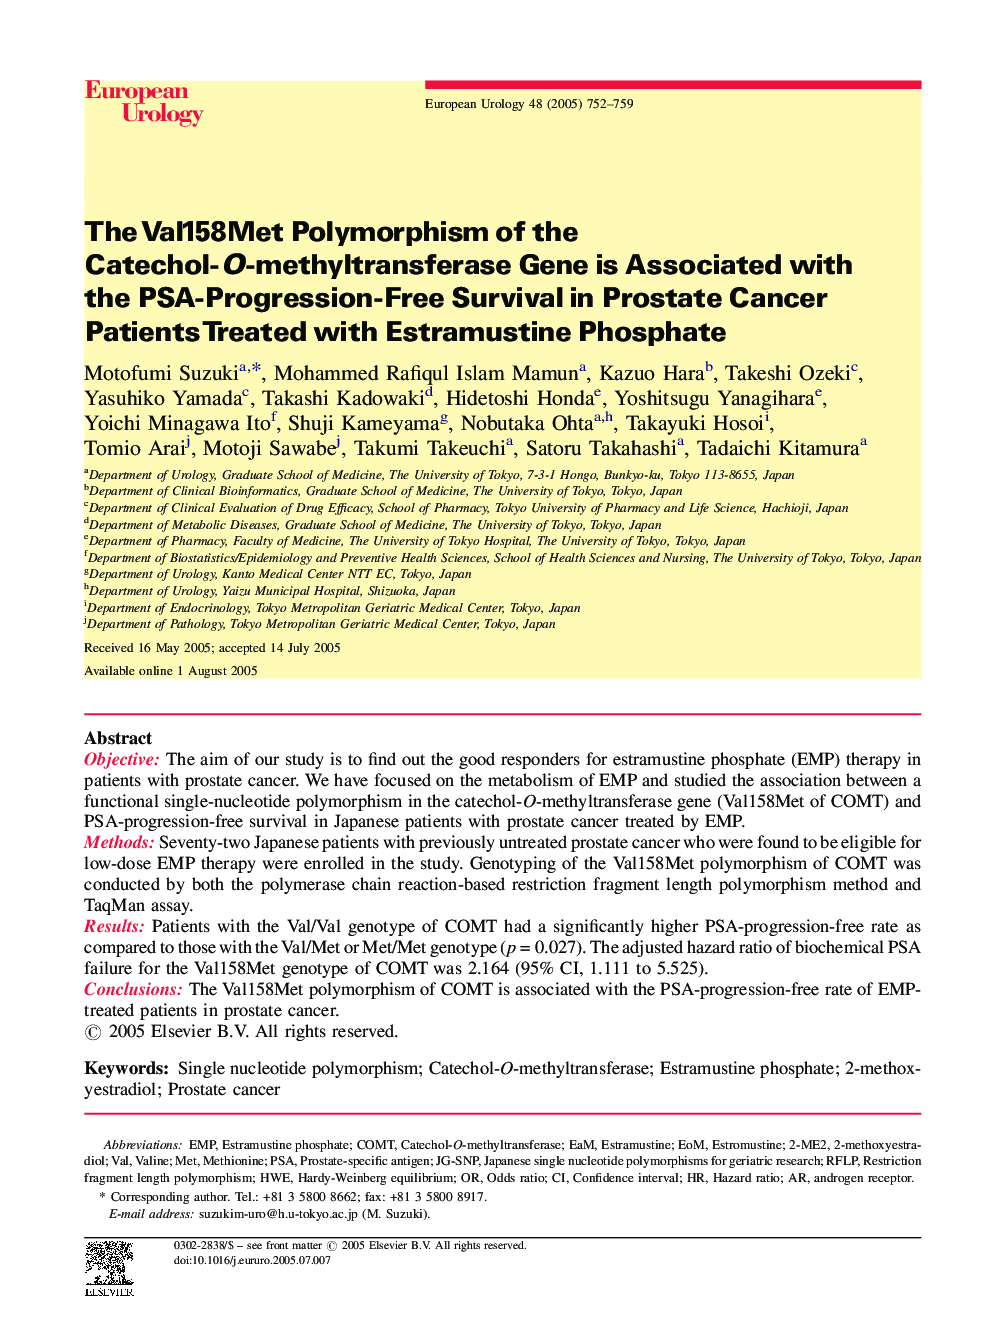 The Val158Met Polymorphism of the Catechol-O-methyltransferase Gene is Associated with the PSA-Progression-Free Survival in Prostate Cancer Patients Treated with Estramustine Phosphate